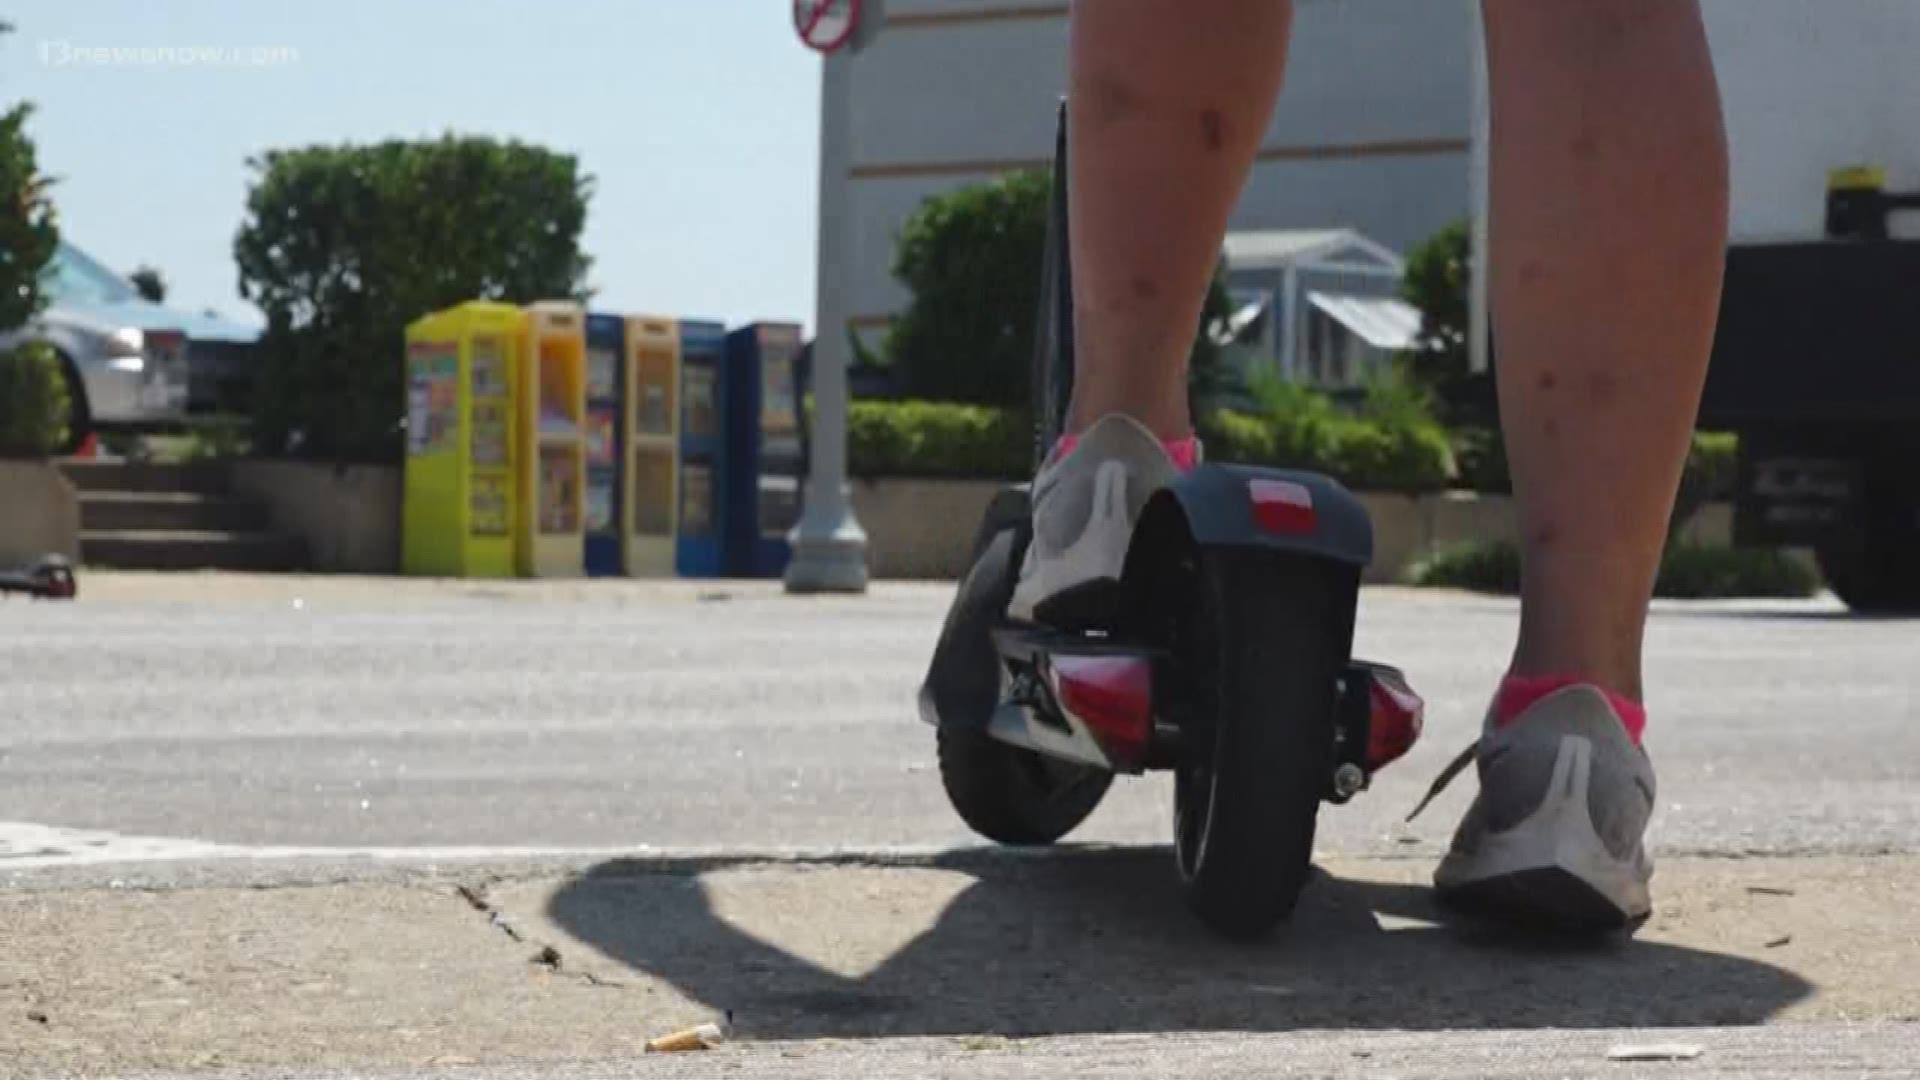 Virginia Beach police are cracking down on electric scooter users with citations. It's only legal to ride the scooter in trolley lanes, but people are taking them on to sidewalks and the boardwalk.